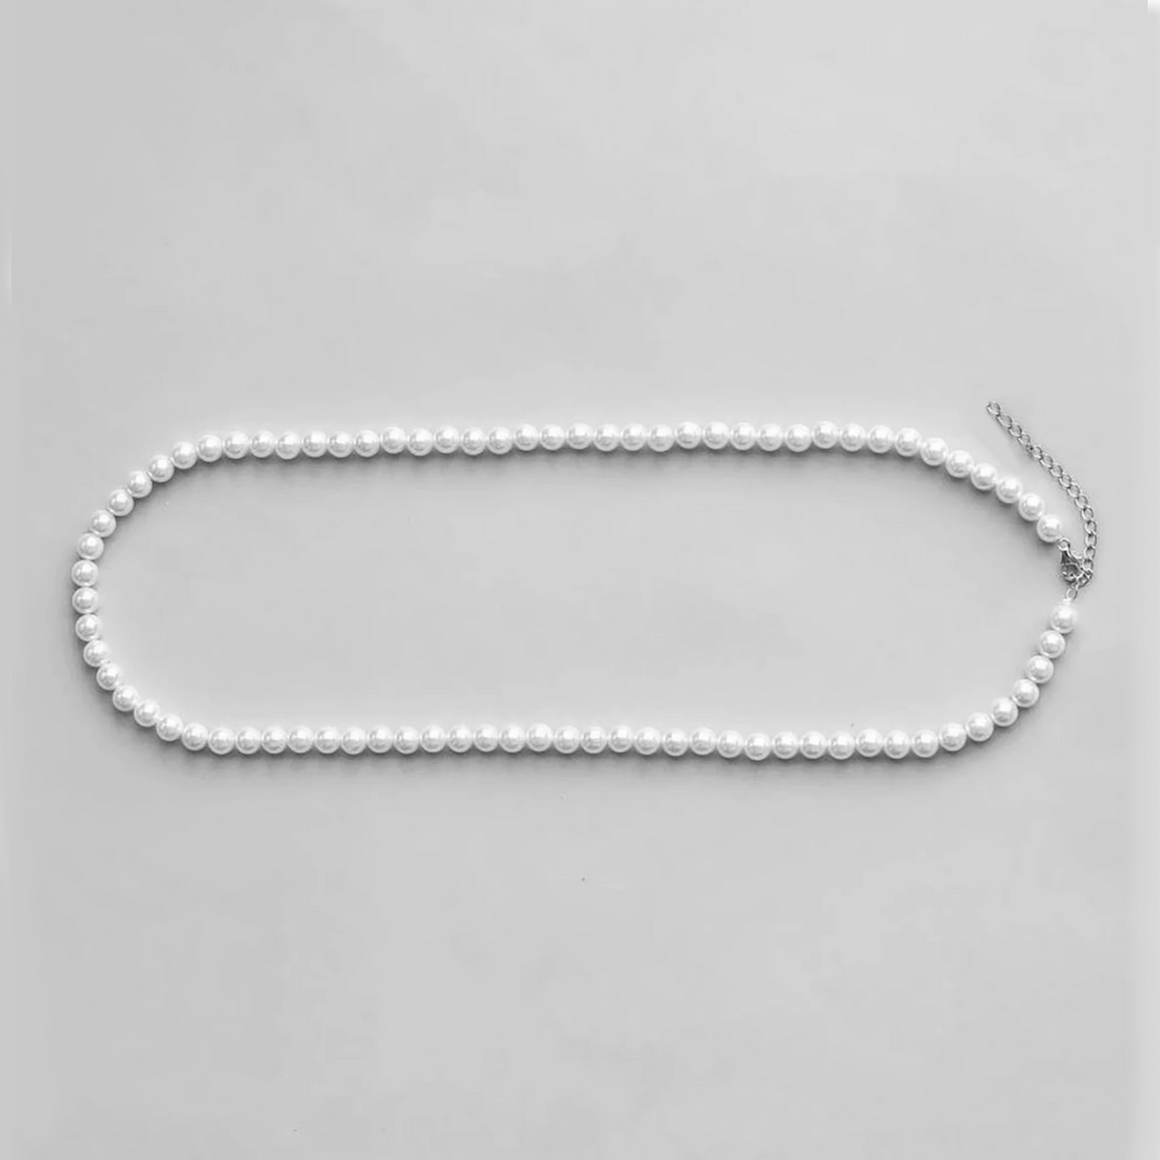 54 FLORAL 8mm PEARL NECKLACE BEAD NECKLACE CHAIN - SILVER GREY